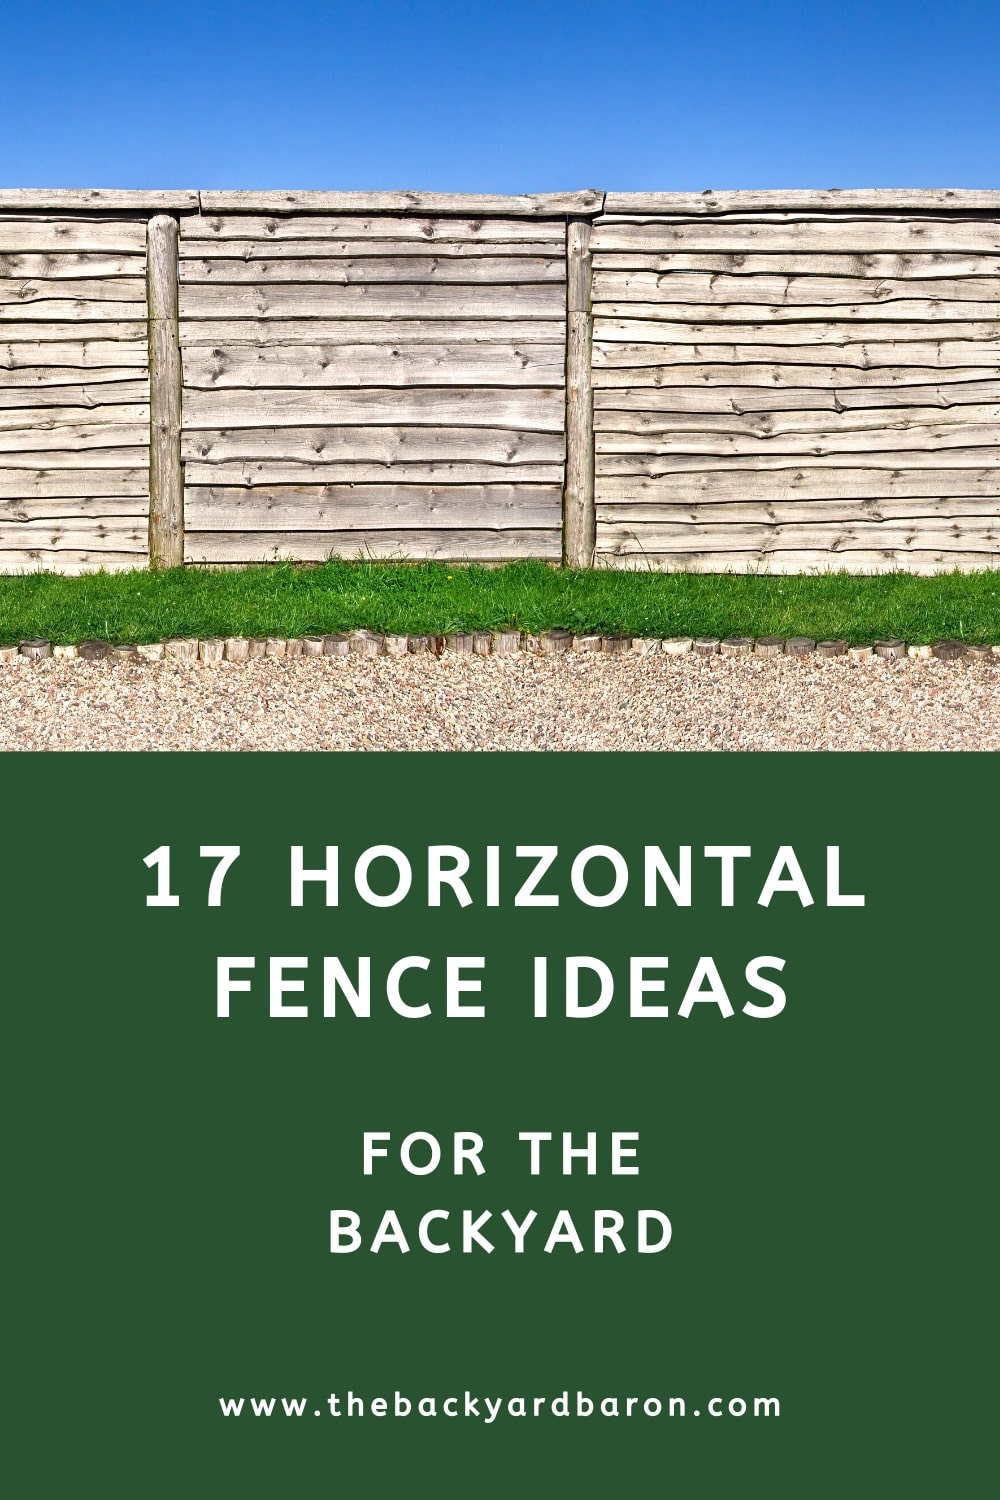 17 Horizontal fencing ideas for the backyard